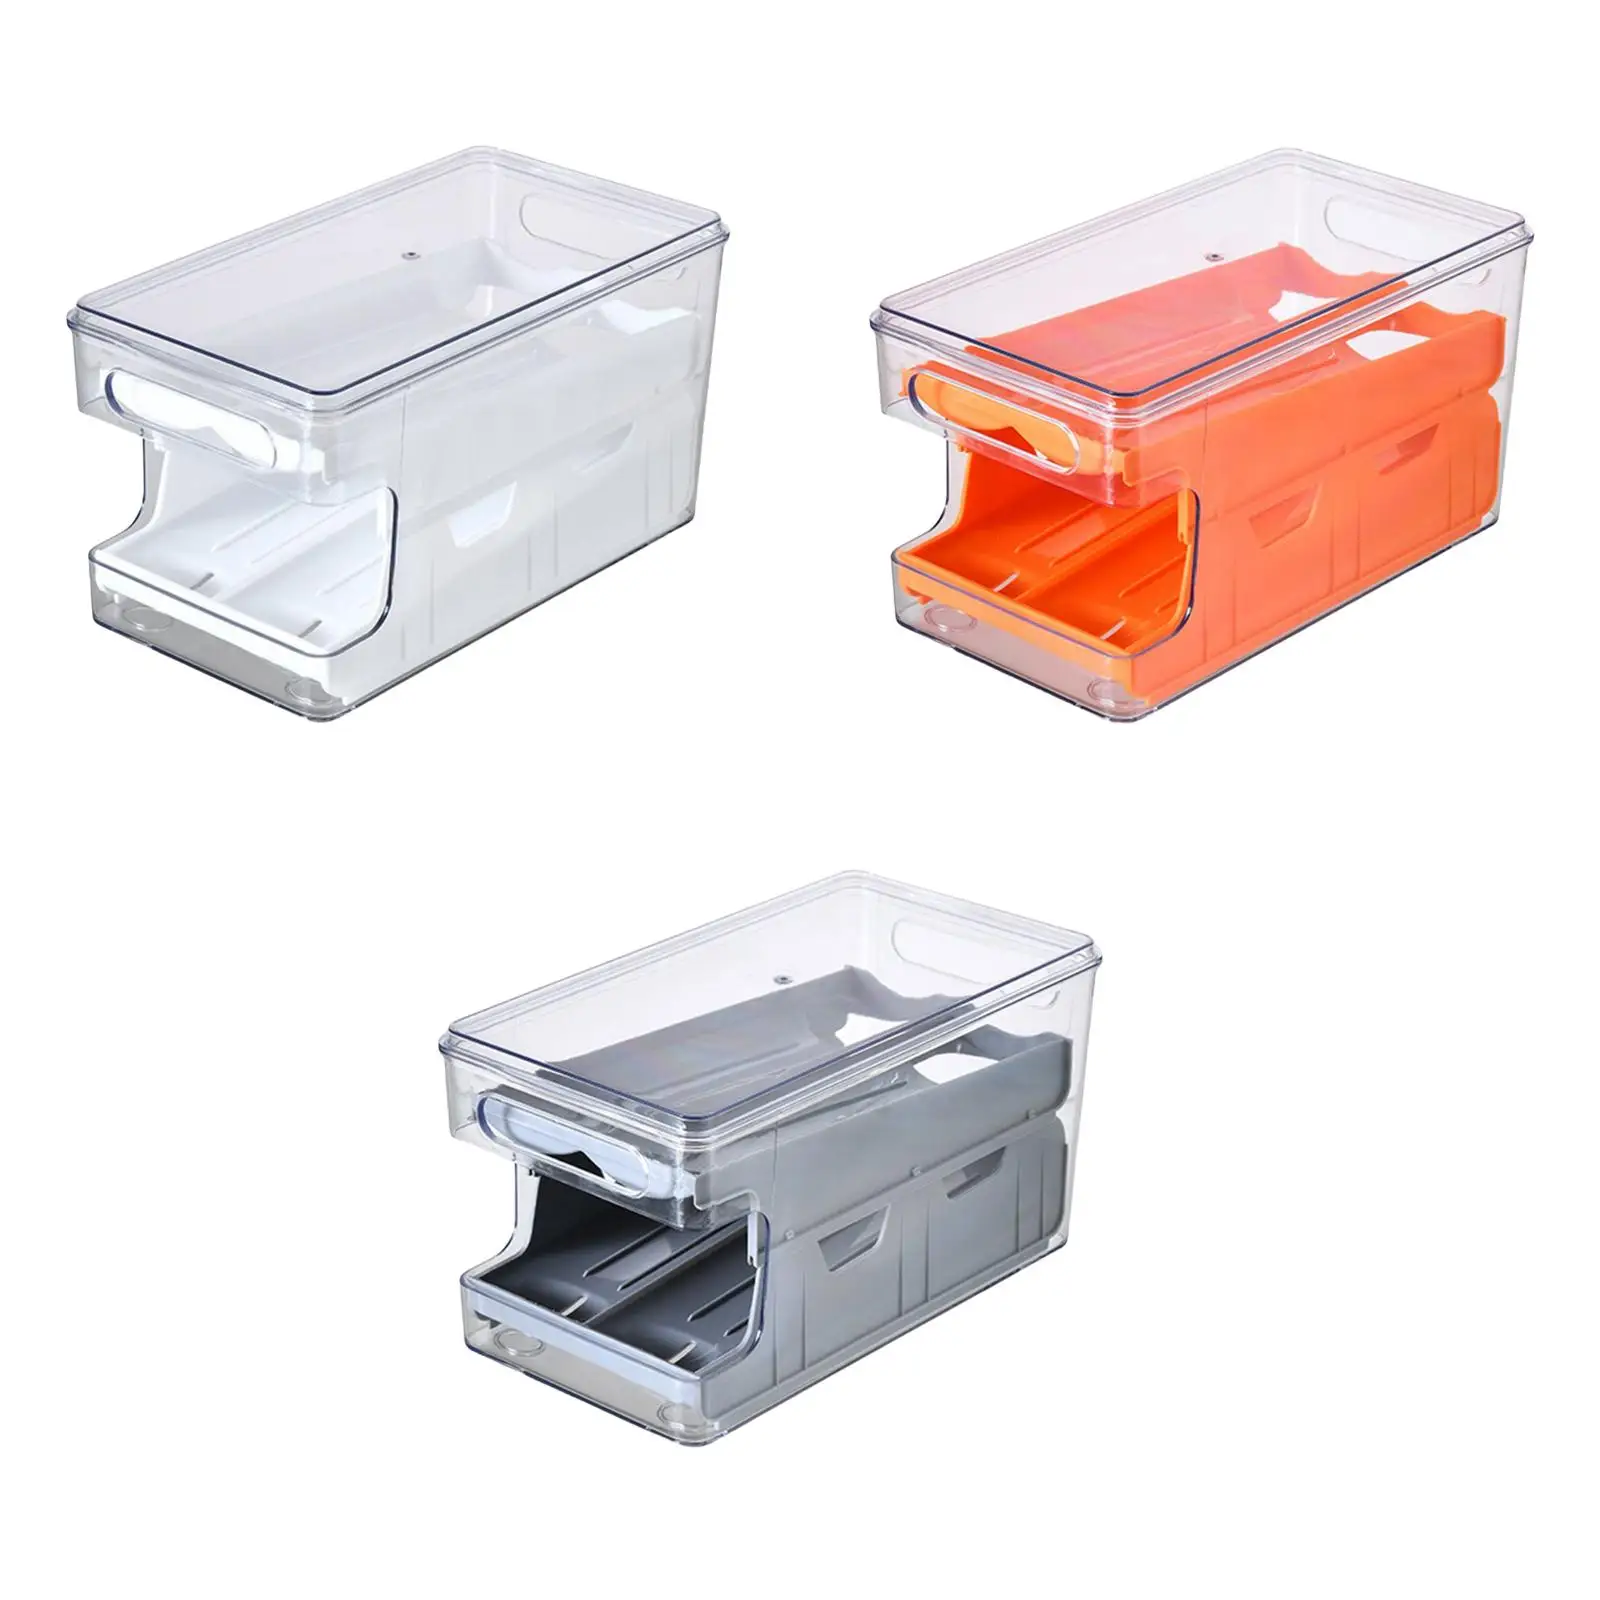 Egg Storage Box Automatic Rolling Double Layer Organizer for Household